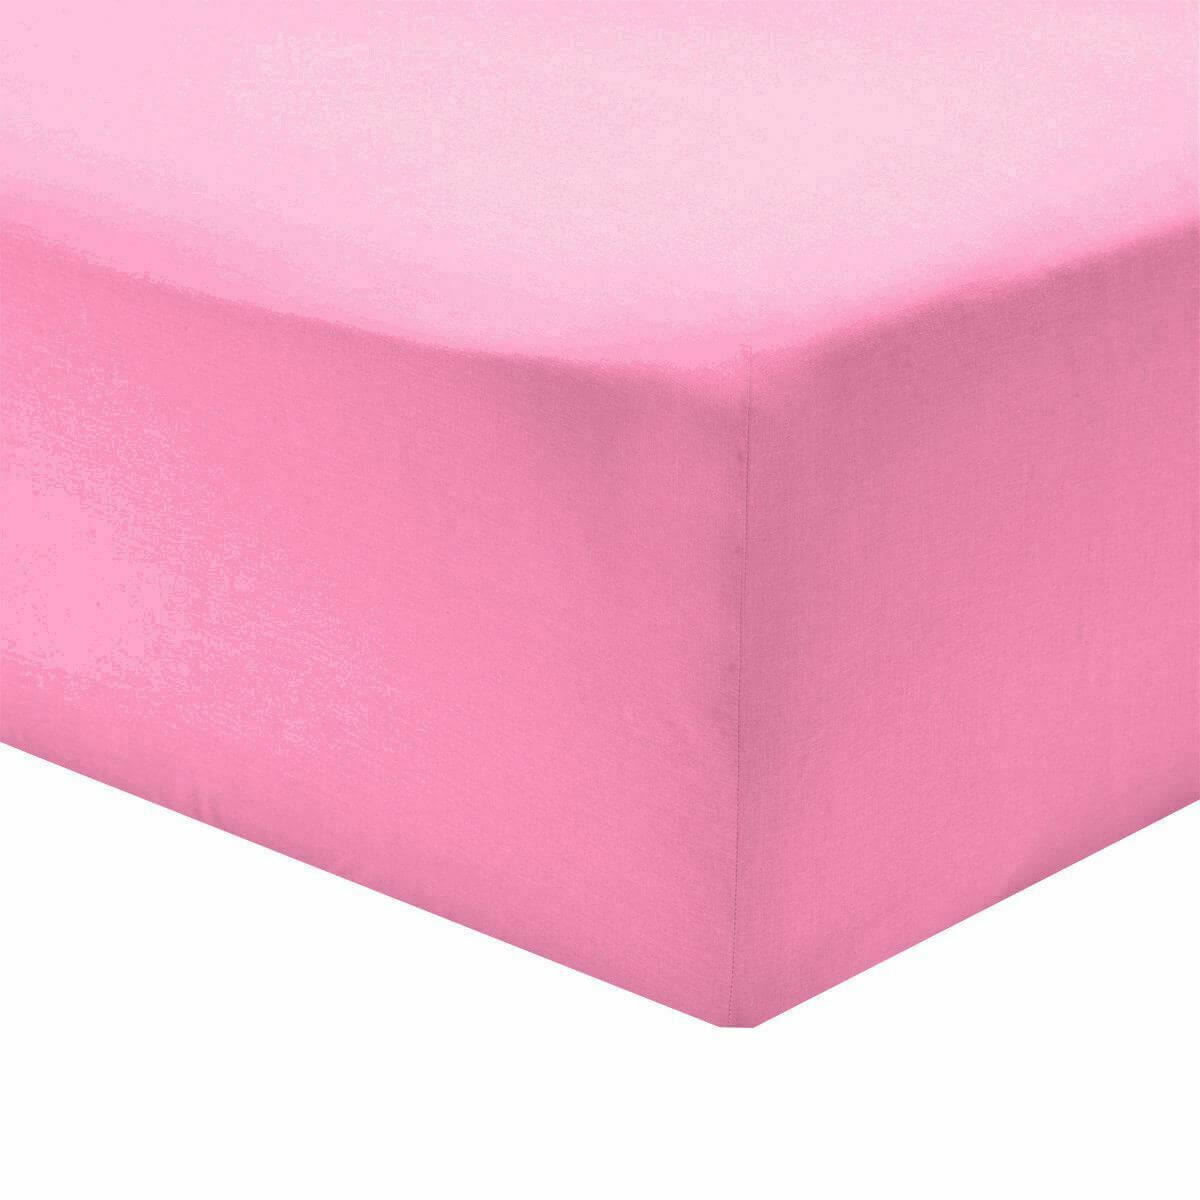 Egyptian Percale Hotel Quality 200 Thread Count Fitted Bed Sheet - TheComfortshop.co.ukBed Sheets0721718962274thecomfortshopTheComfortshop.co.ukPink T200 Fitted Sheet SinglePinkSingleEgyptian Percale Hotel Quality 200 Thread Count Fitted Bed Sheet - TheComfortshop.co.uk